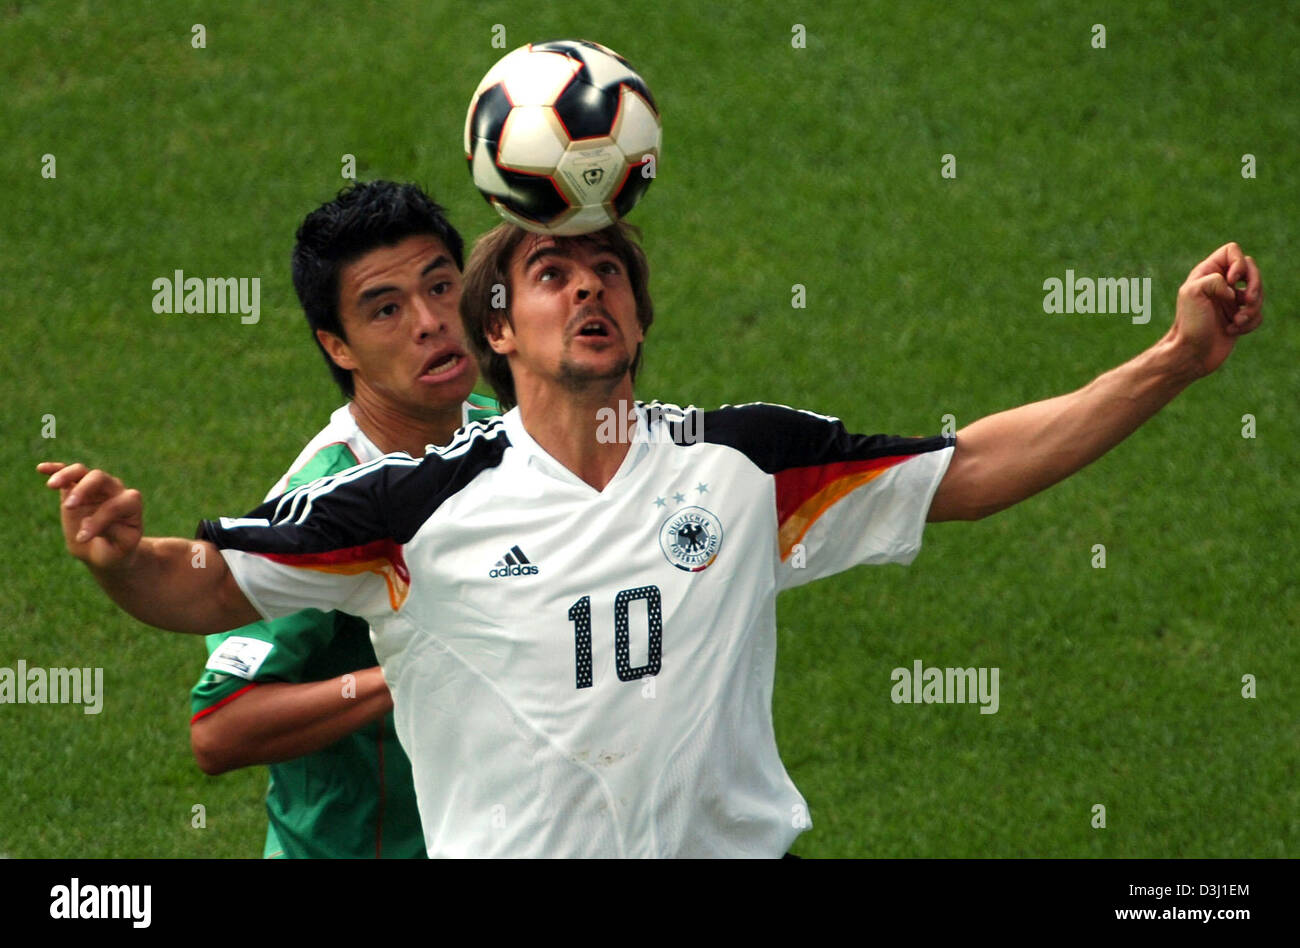 (dpa) - German soccer player Sebastian Deisler (front) fights for the ball with Mexican Ricardo Osorio (back) during the third place match of the Confederations Cup tournament Germany vs Mexico in Leipzig, Germany, 29 June 2005. (Eds: Internet use and mobile applications subject to FIFA's terms and conditions) Stock Photo